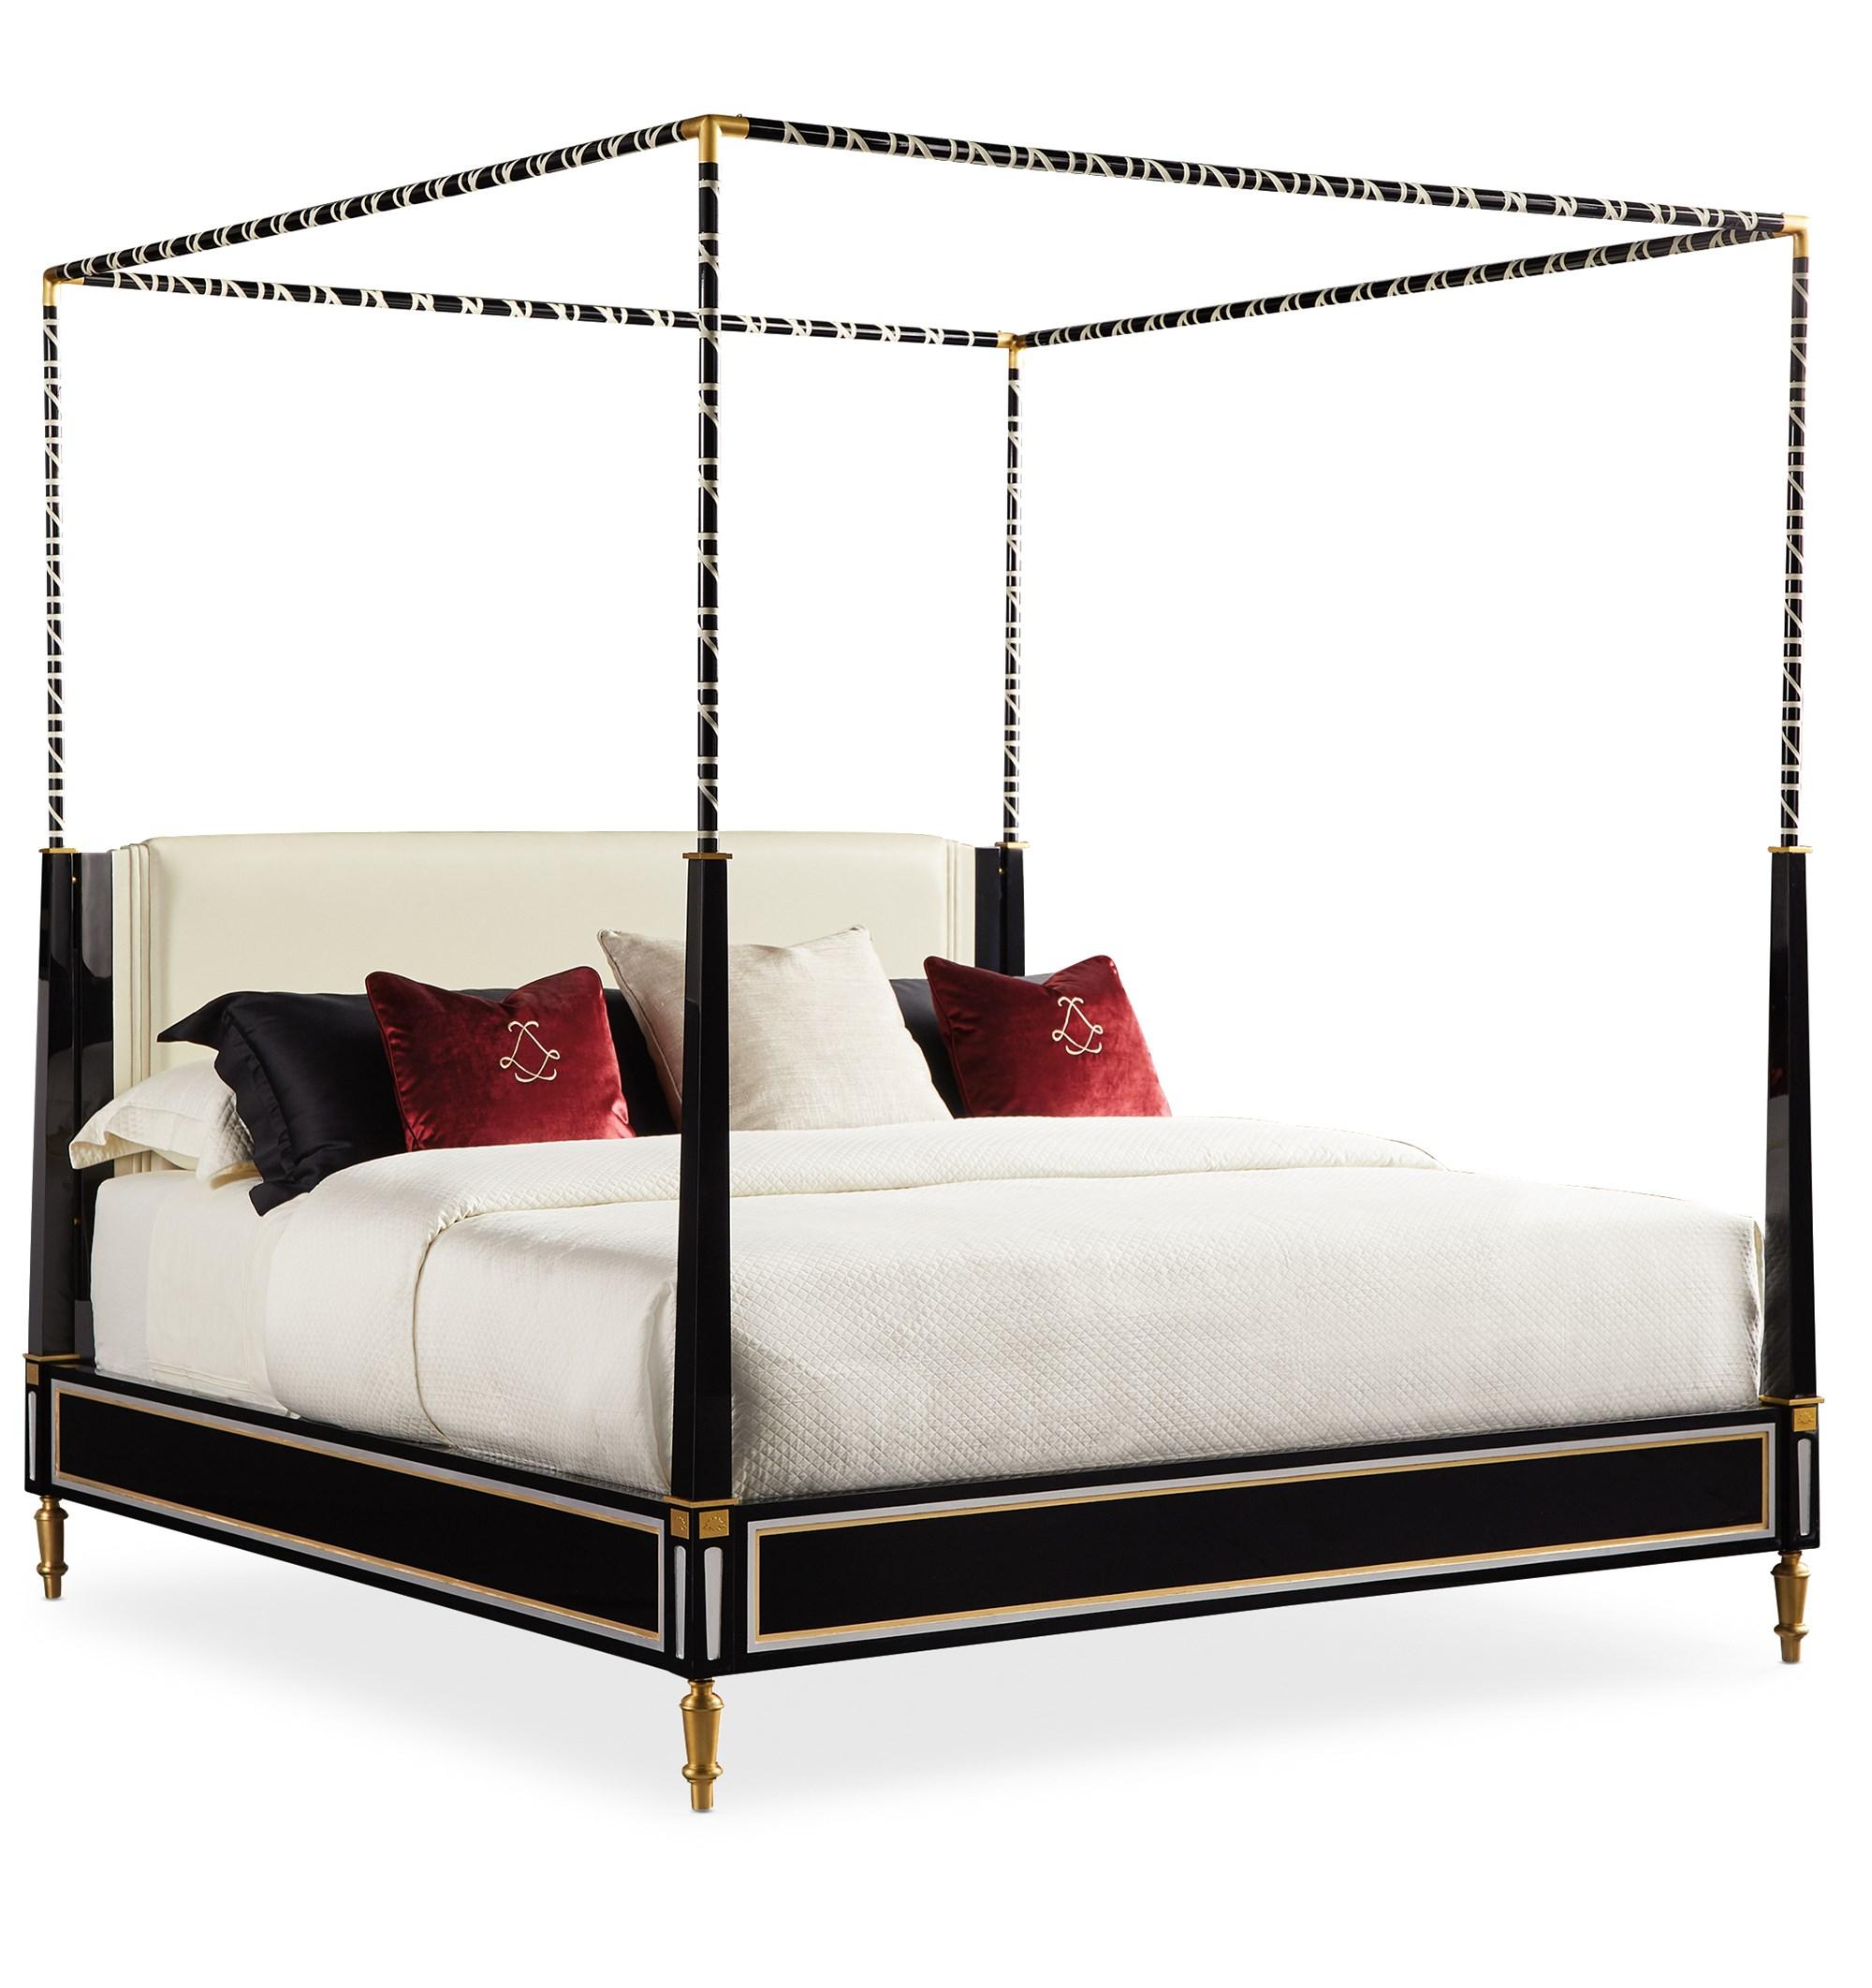 

    
Creme Leather & Black Lacquer Finish King Size Bed Set 2Pcs THE COUTURIER CANOPY BED / OPPOSITES ATTRACT by Caracole
